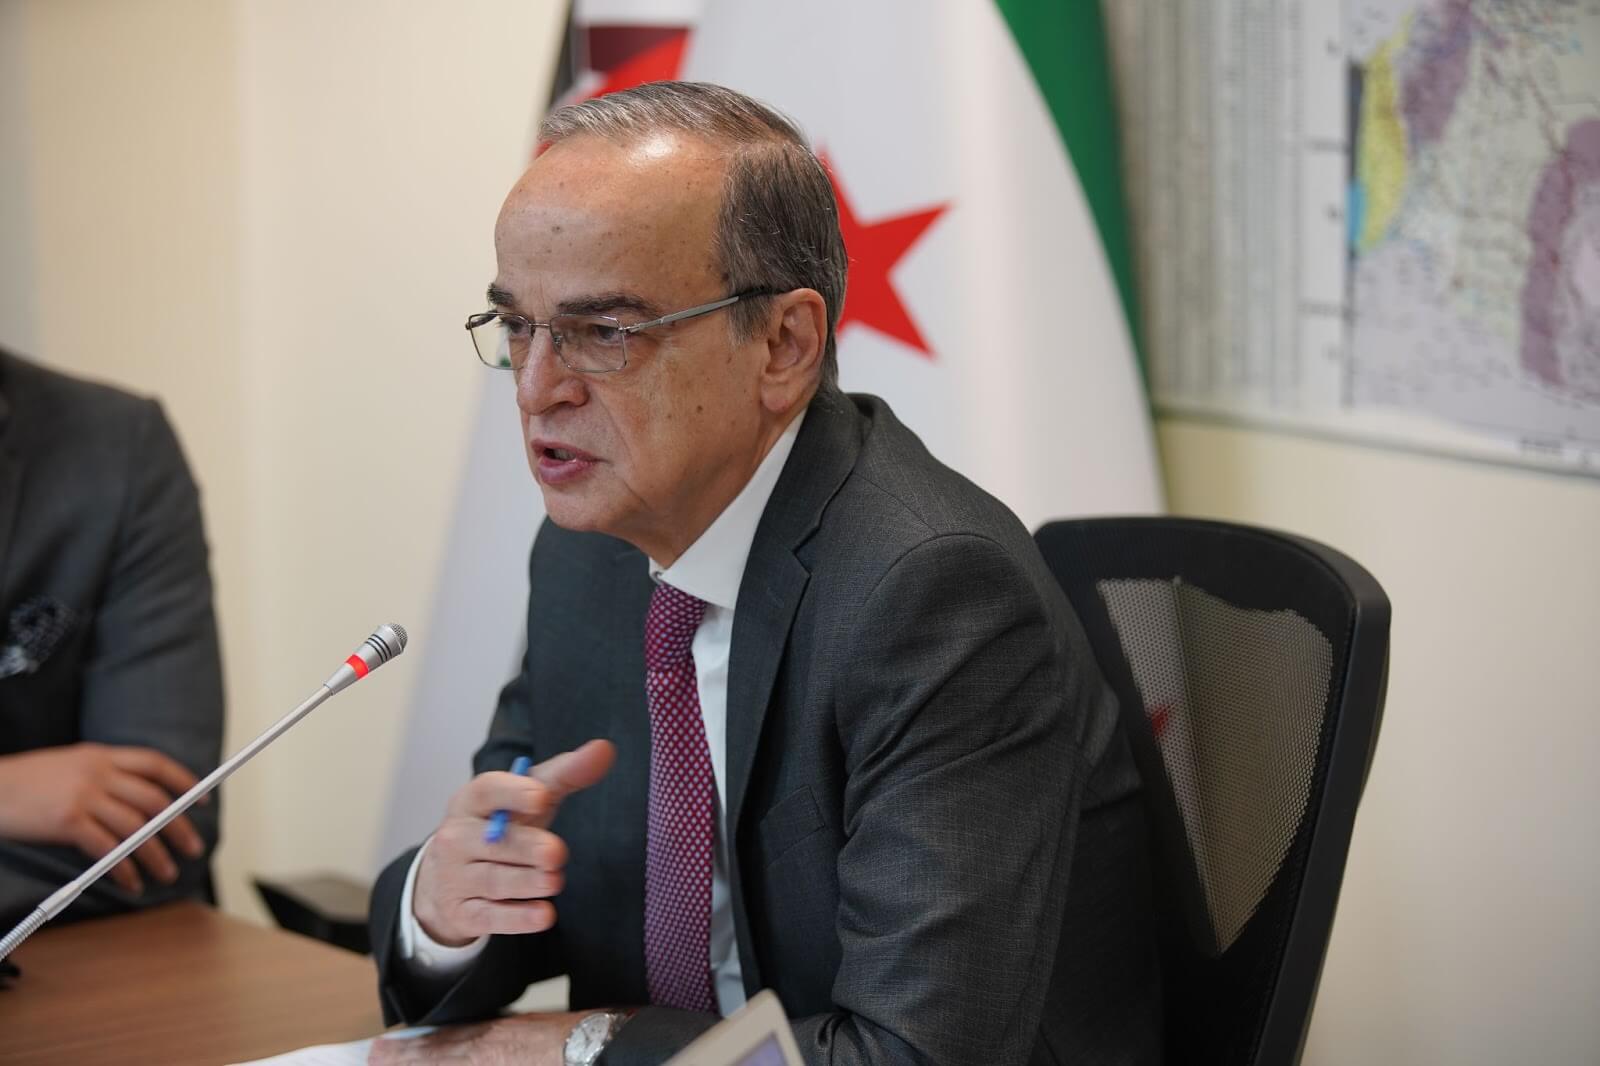 Al-Bahra: Detainees Issue is Key National Matter for All Syrian Citizens